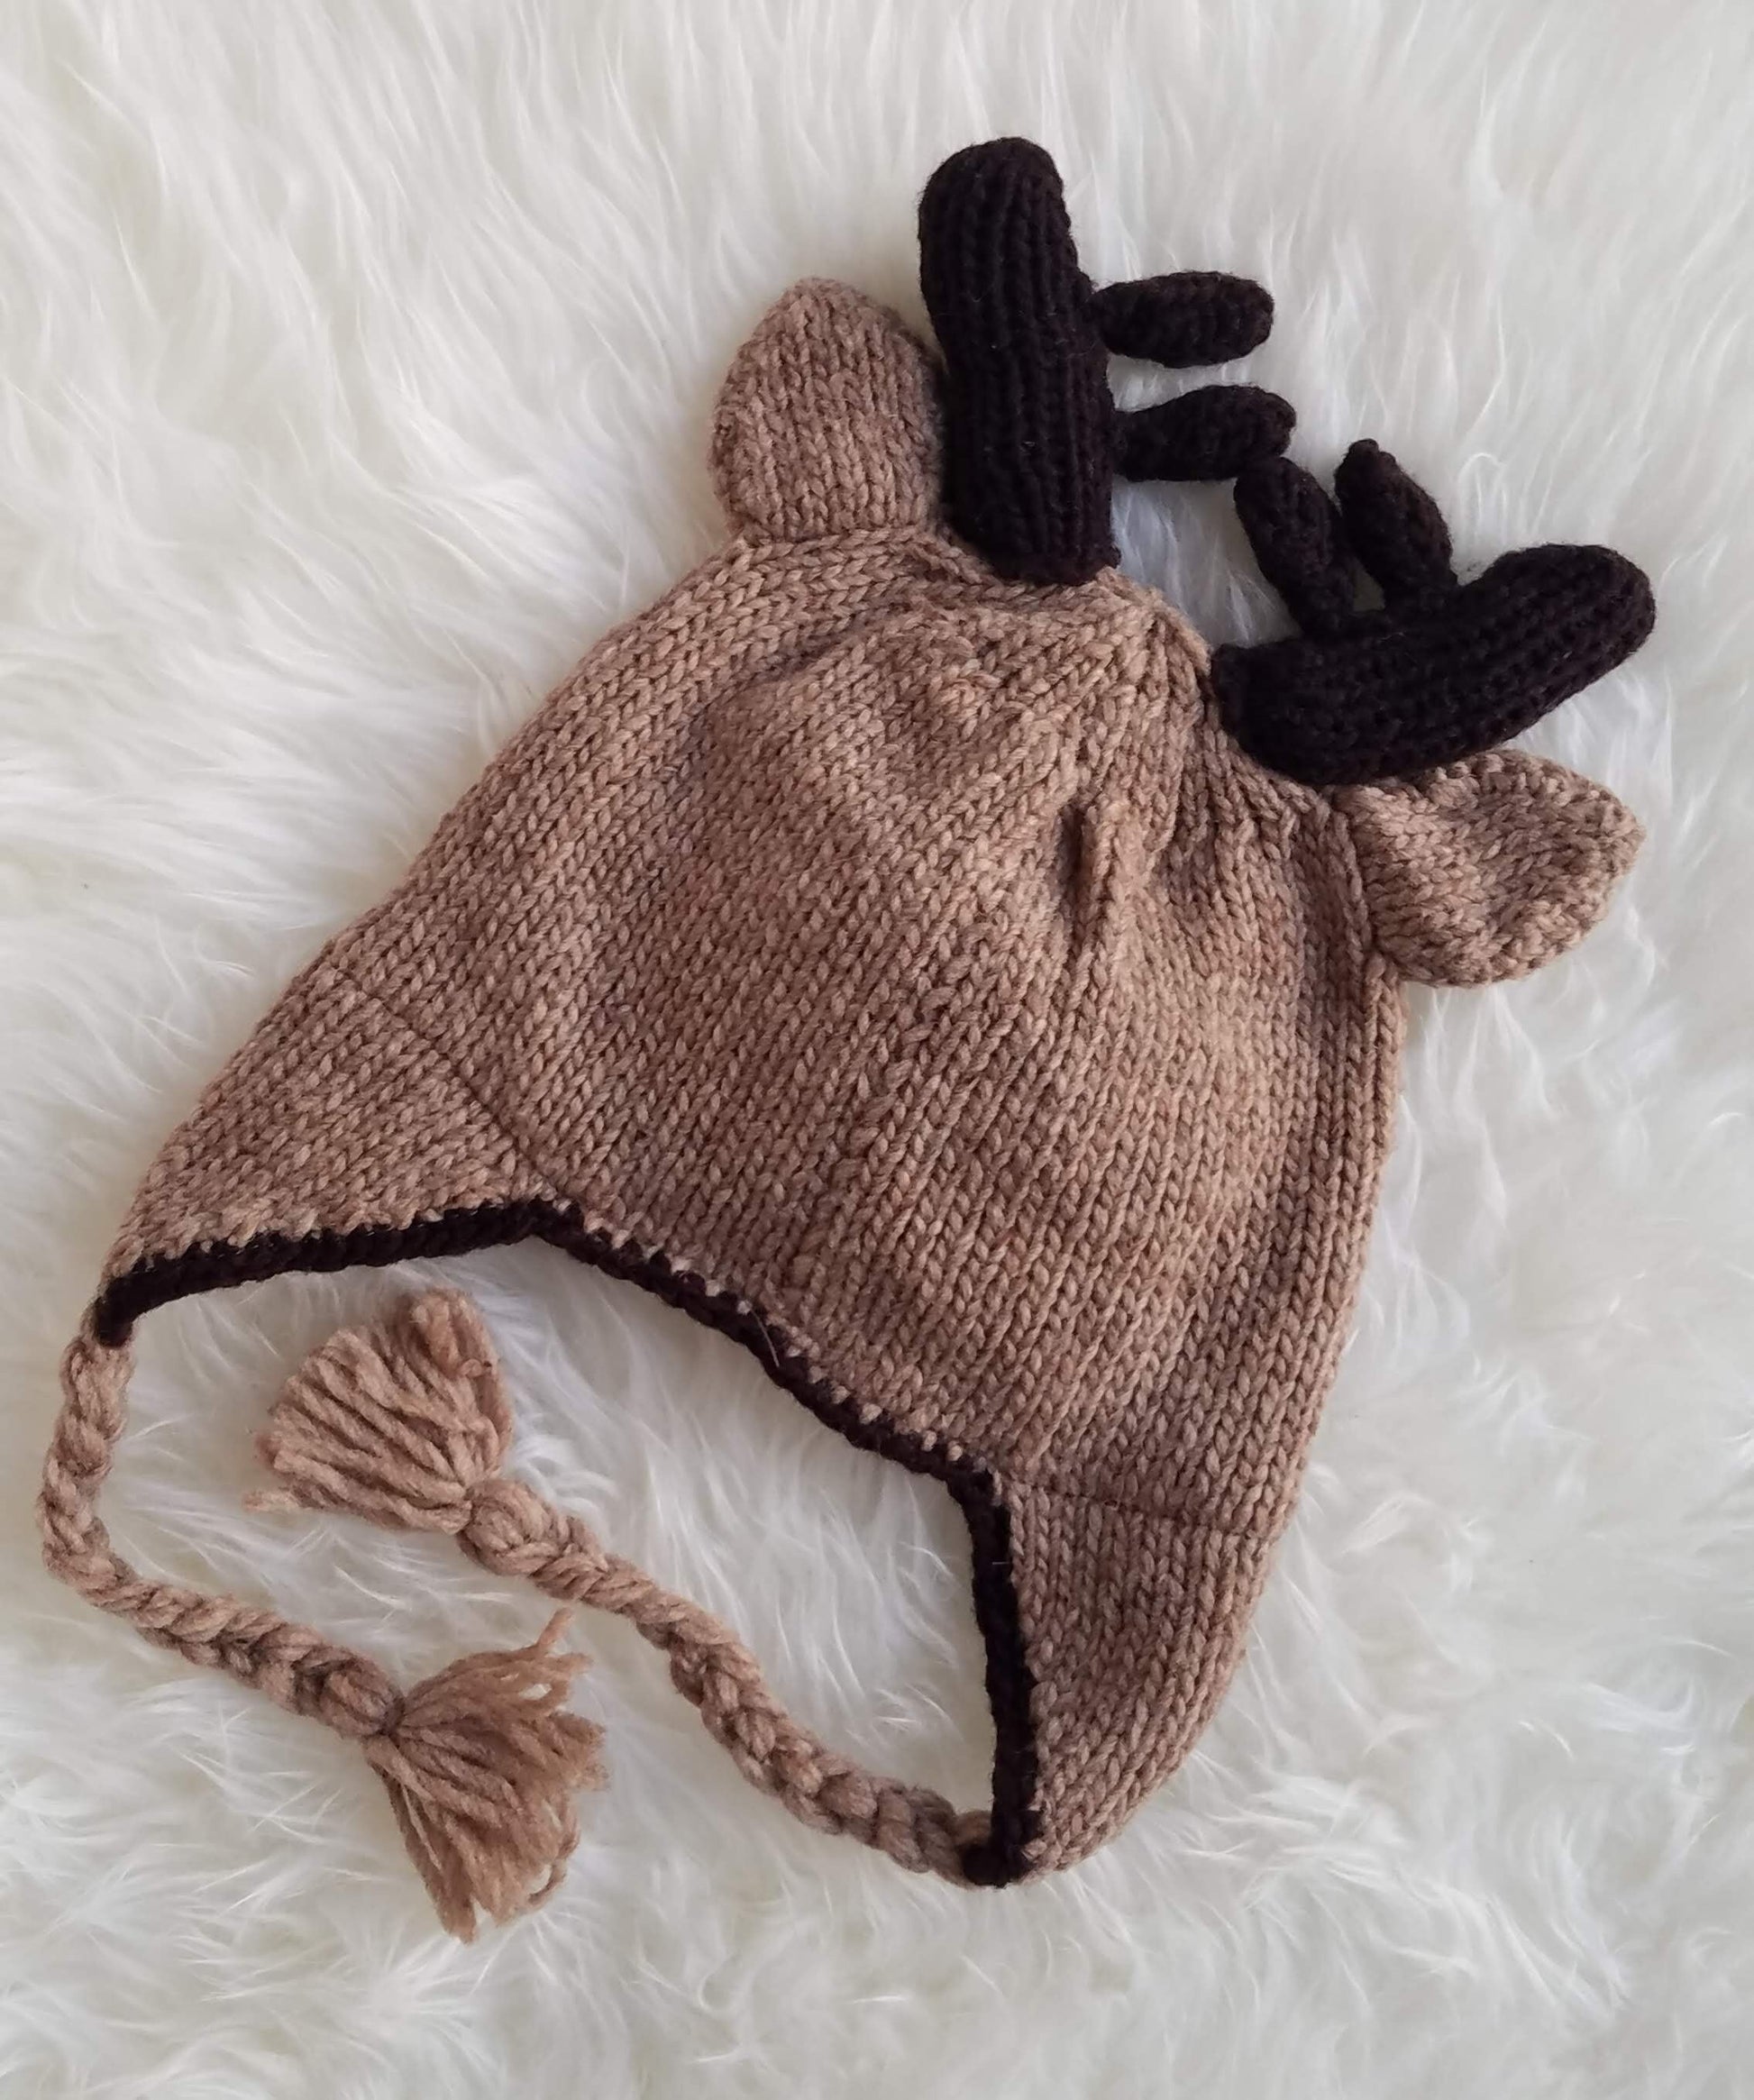 Moose Fleece Beanie Hat for Kids and Adults